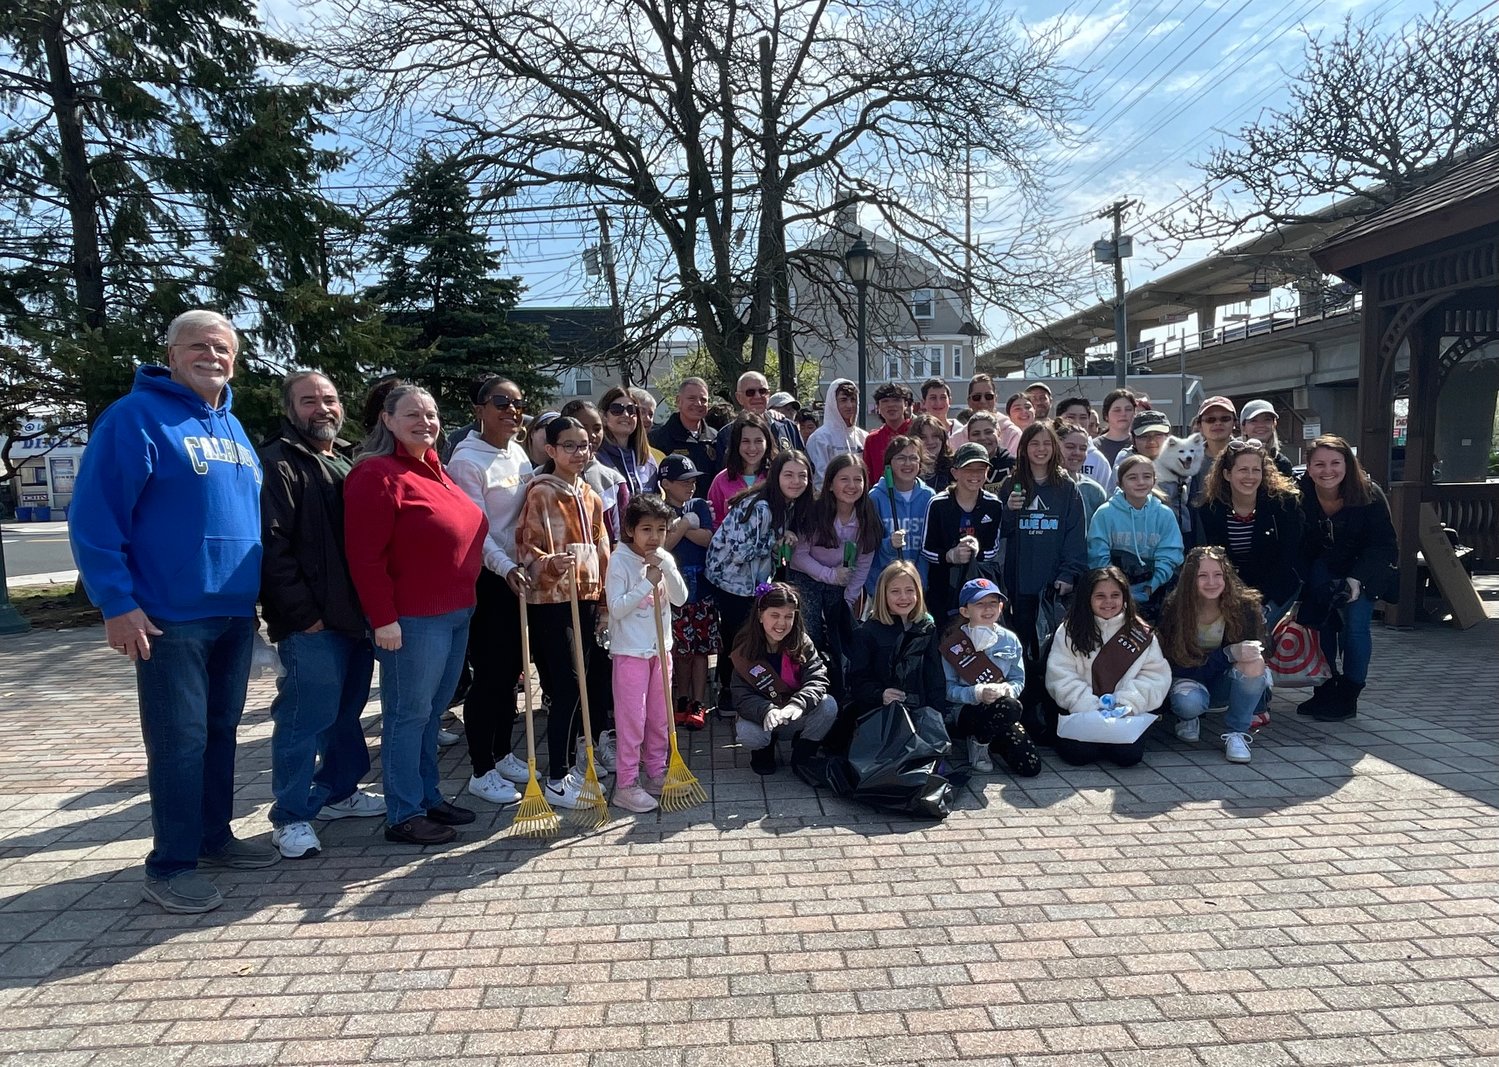 It was a community event on Sunday at the South Merrick Civic Association’s annual Spring Clean Sweep. A large group of volunteers took part in Merrick’s annual beautification project